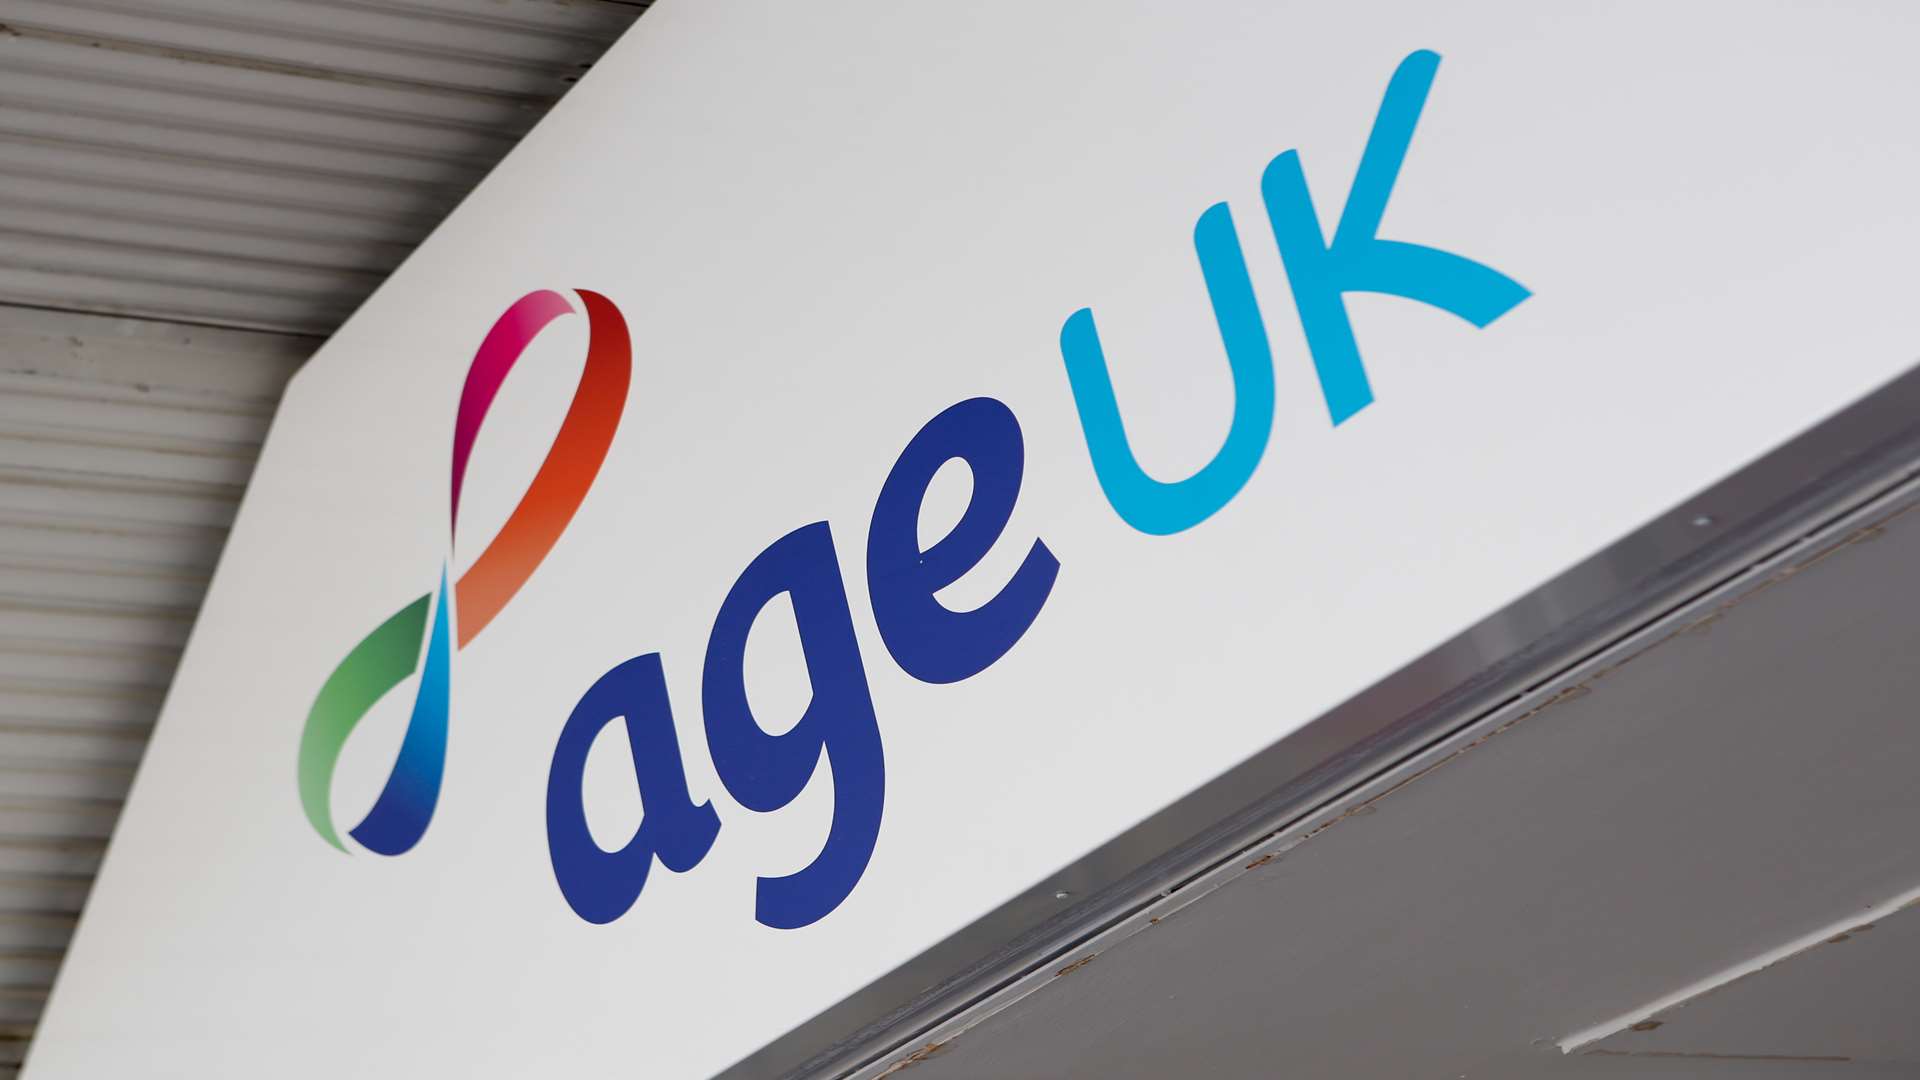 Lee Mason, 33, from Gravesend, has been charged with an alleged burglary at Age UK's centre in Clarence Row, Gravesend